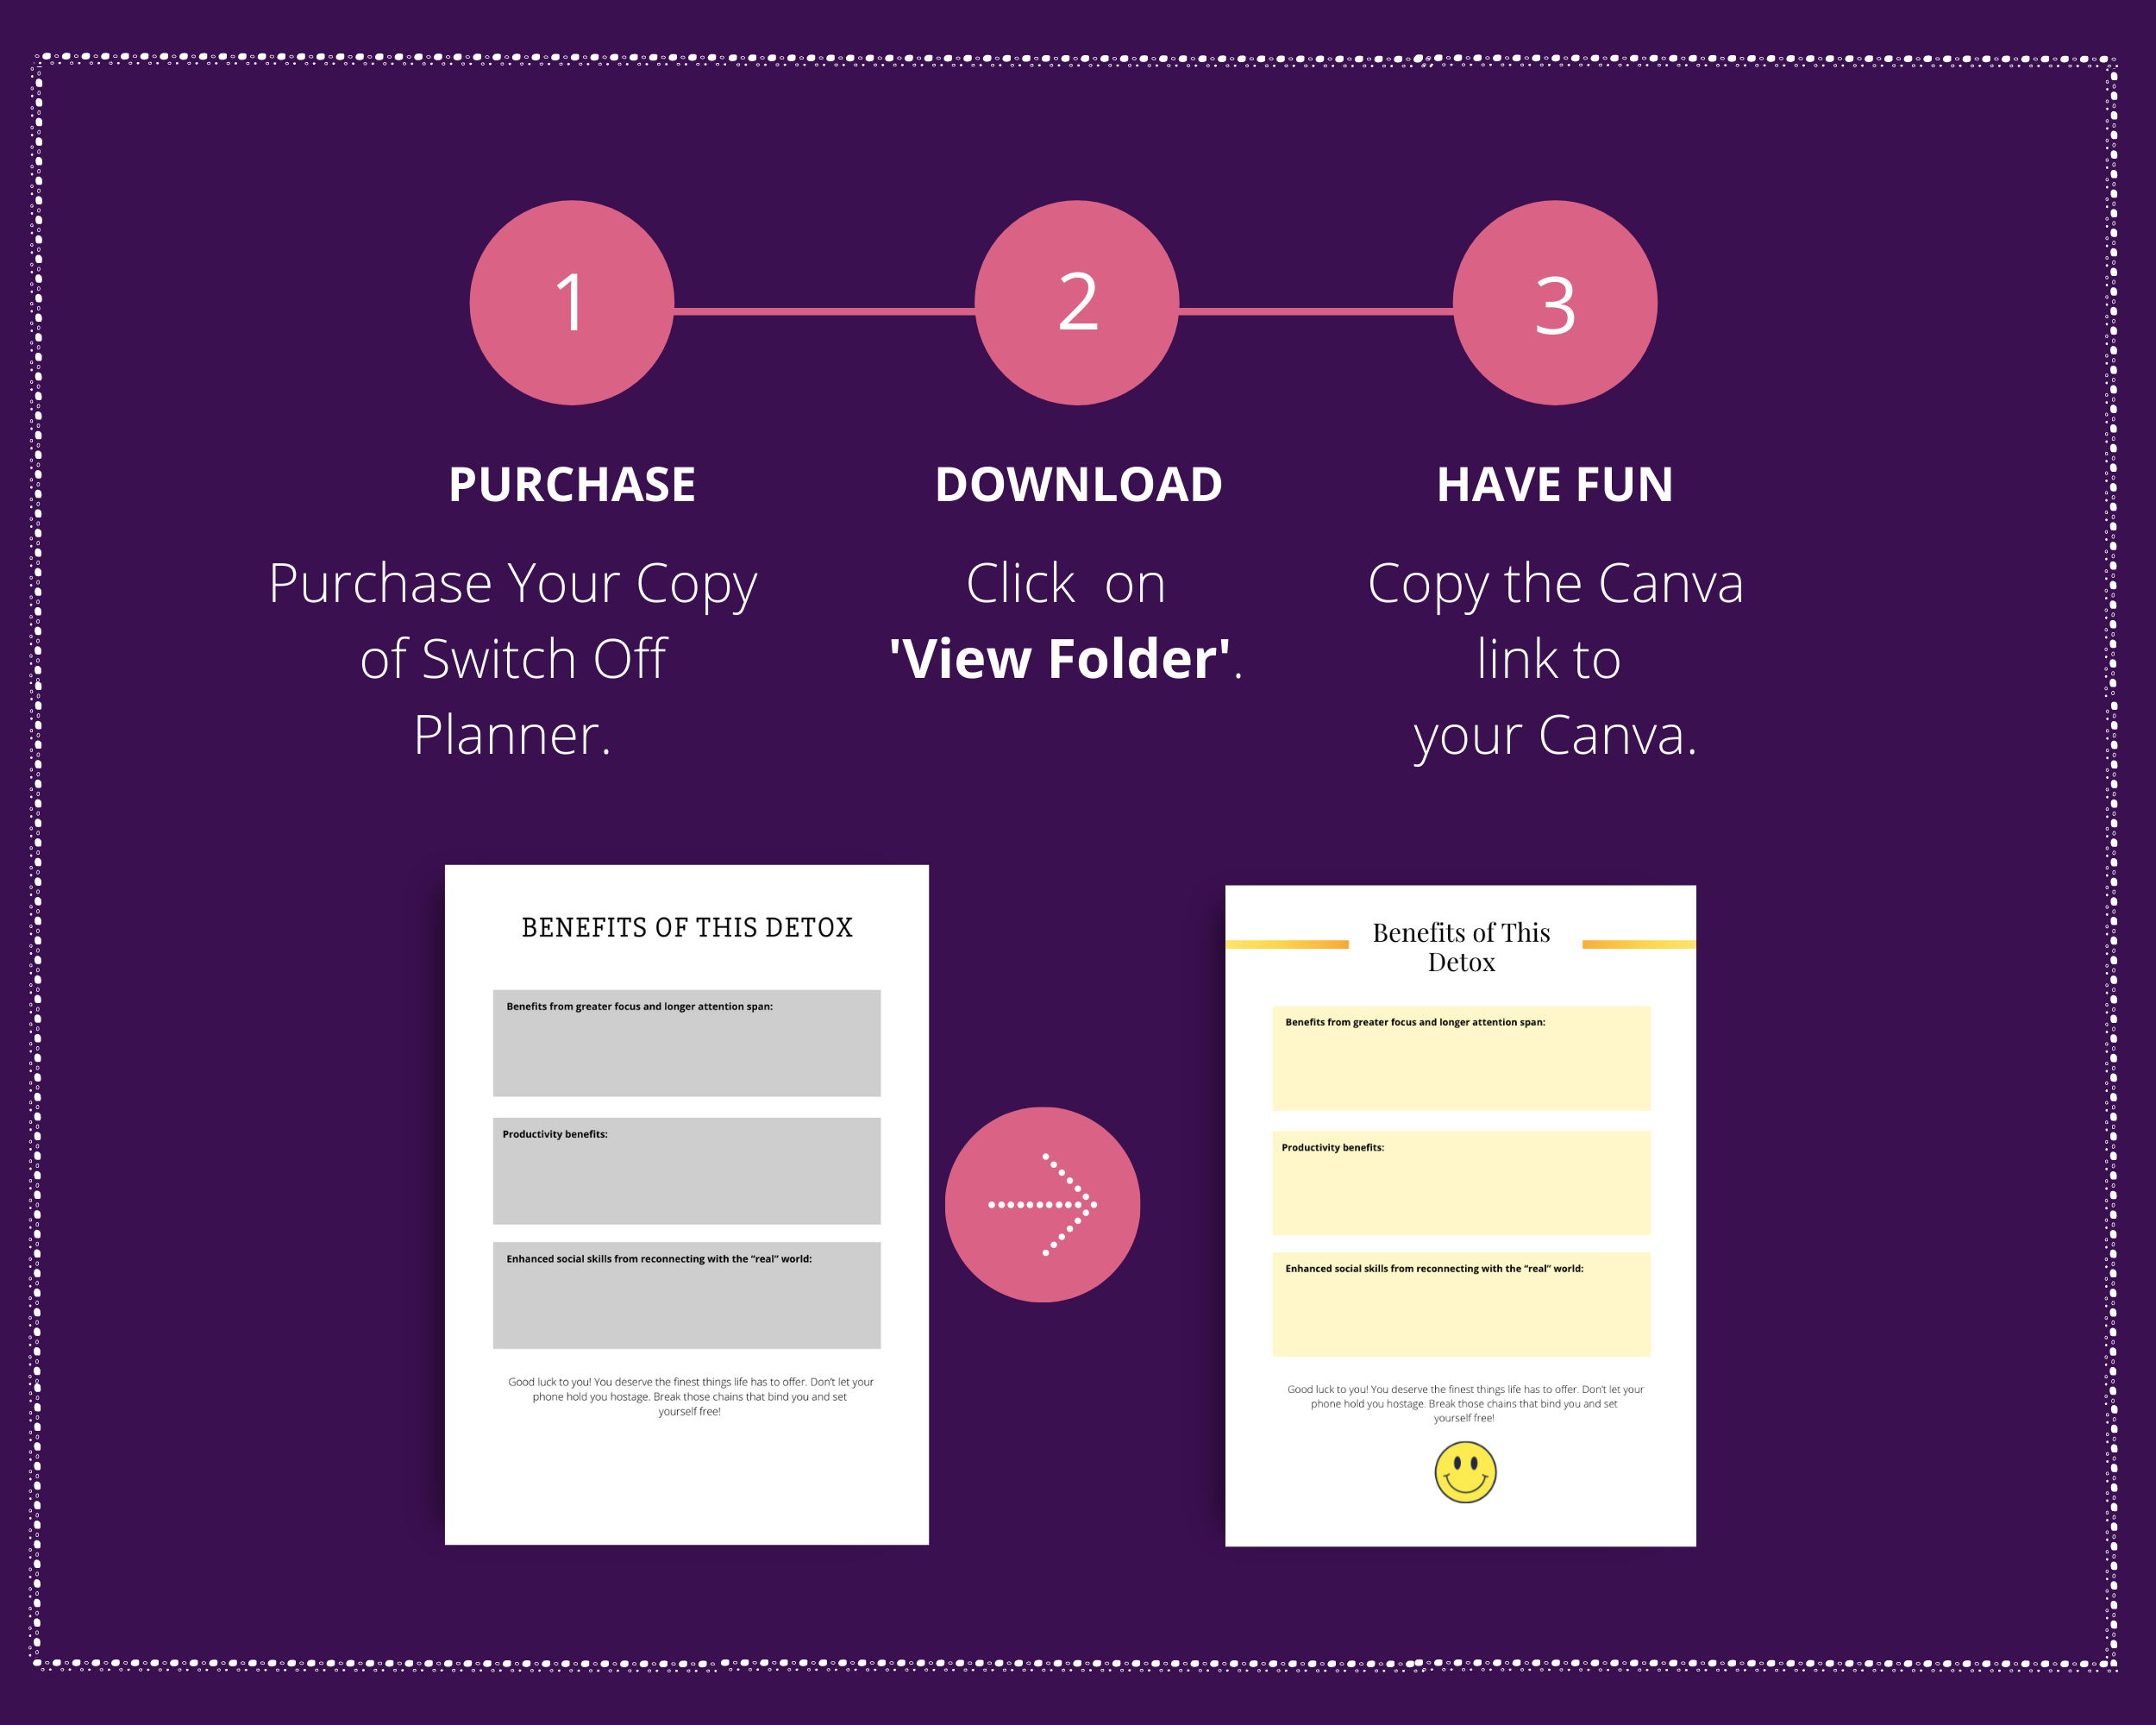 Editable Switch Off Planner Templates in Canva | Commercial Use